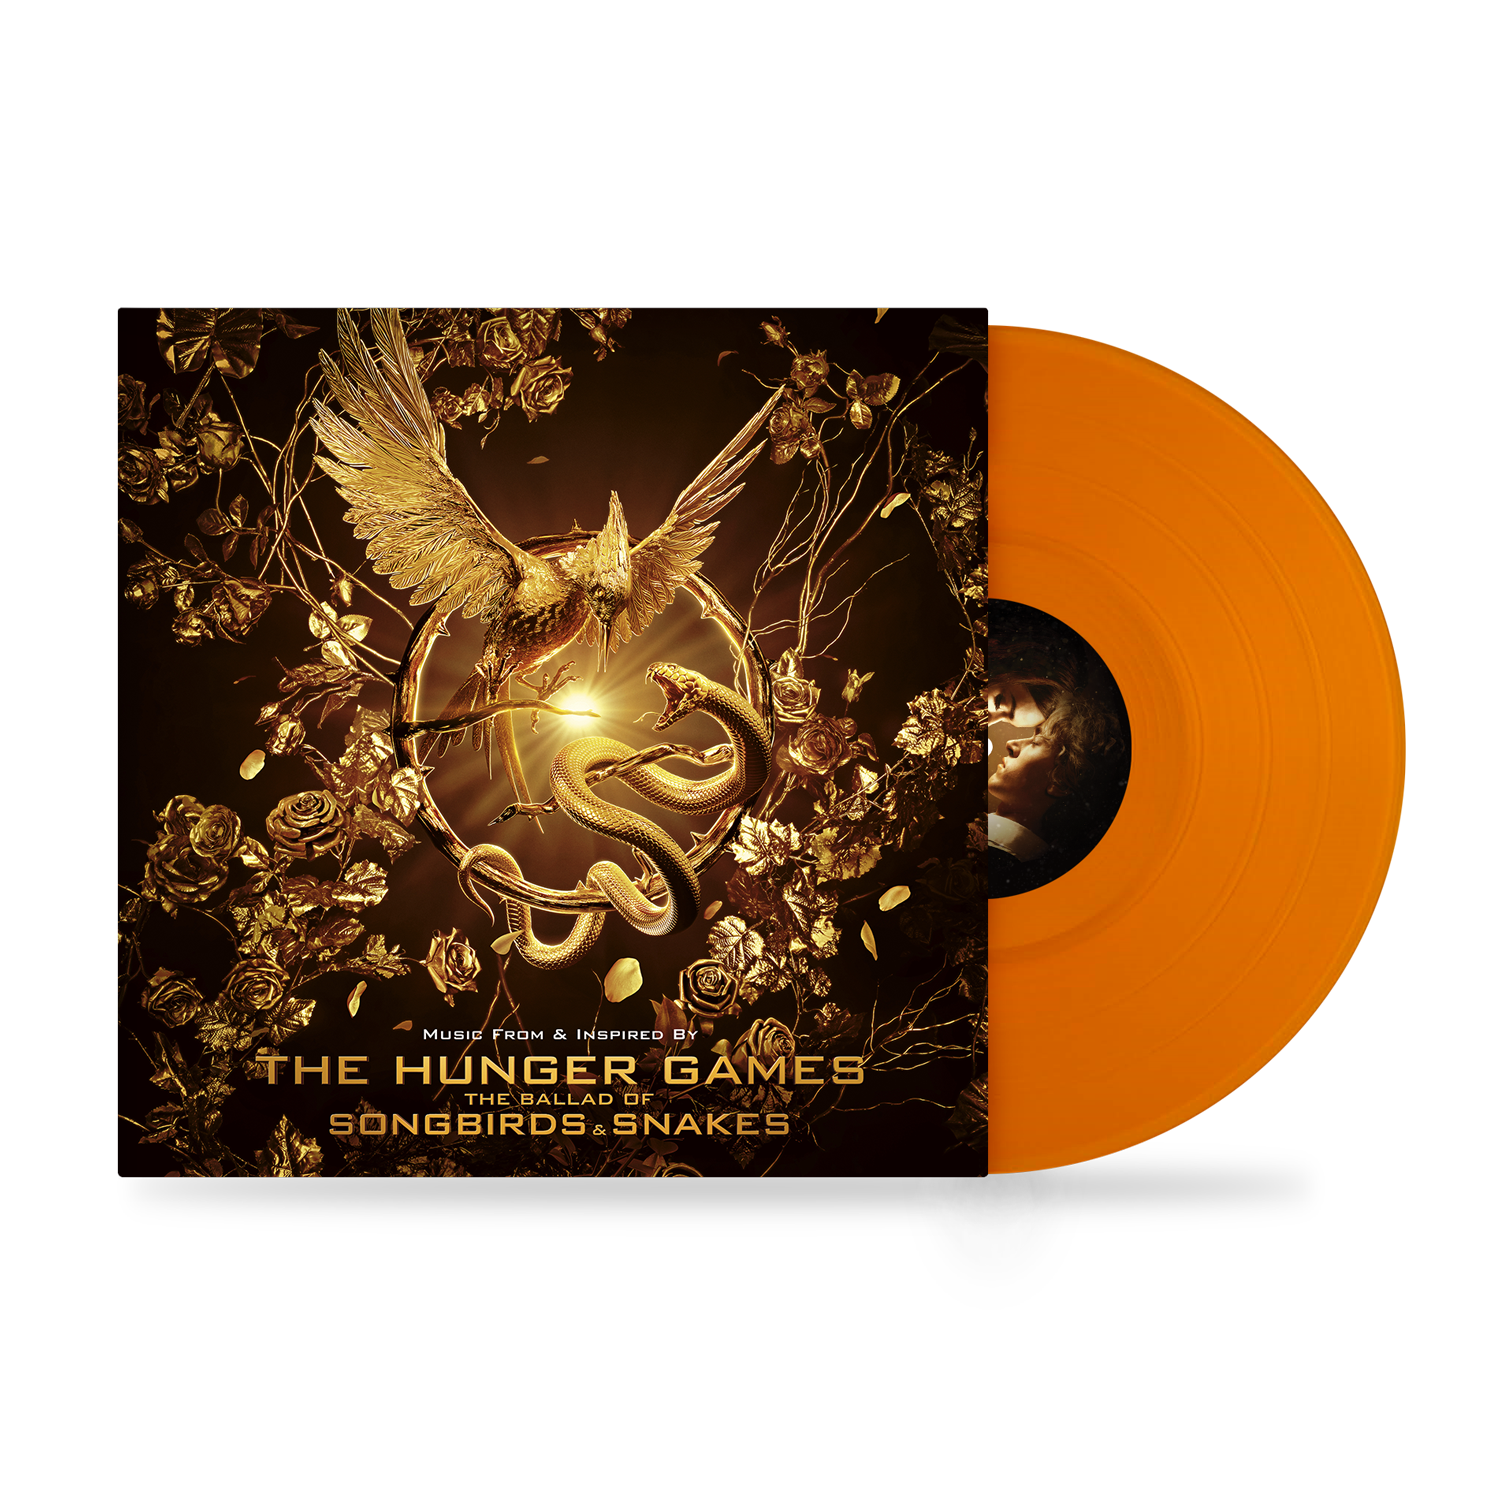 Various Artists - The Hunger Games - The Ballad of Songbirds & Snakes: Limited Orange Vinyl LP